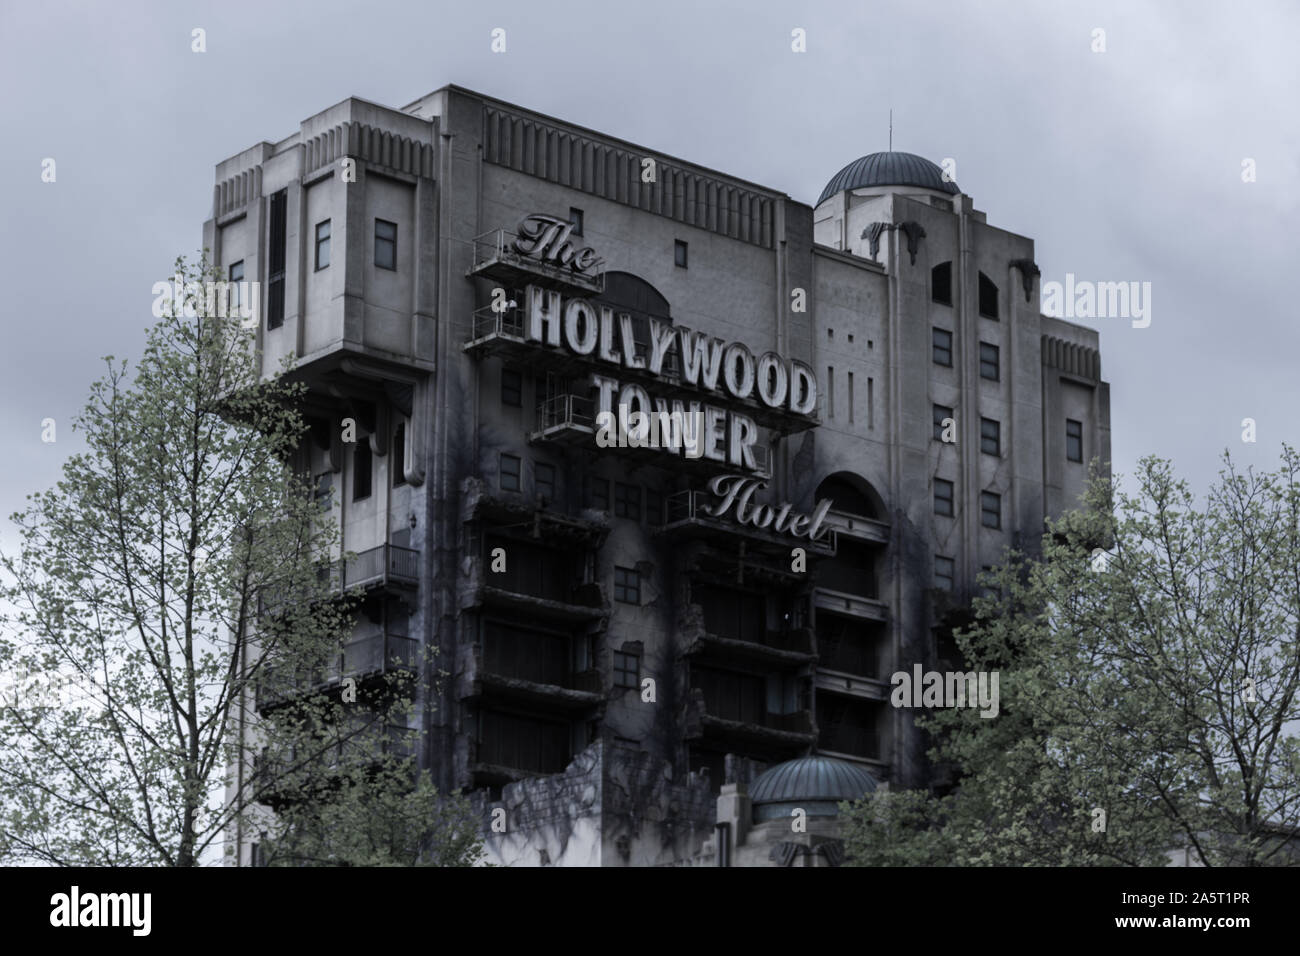 A picture of the Hollywood Tower Hotel attraction, in Disneyland Paris. Stock Photo